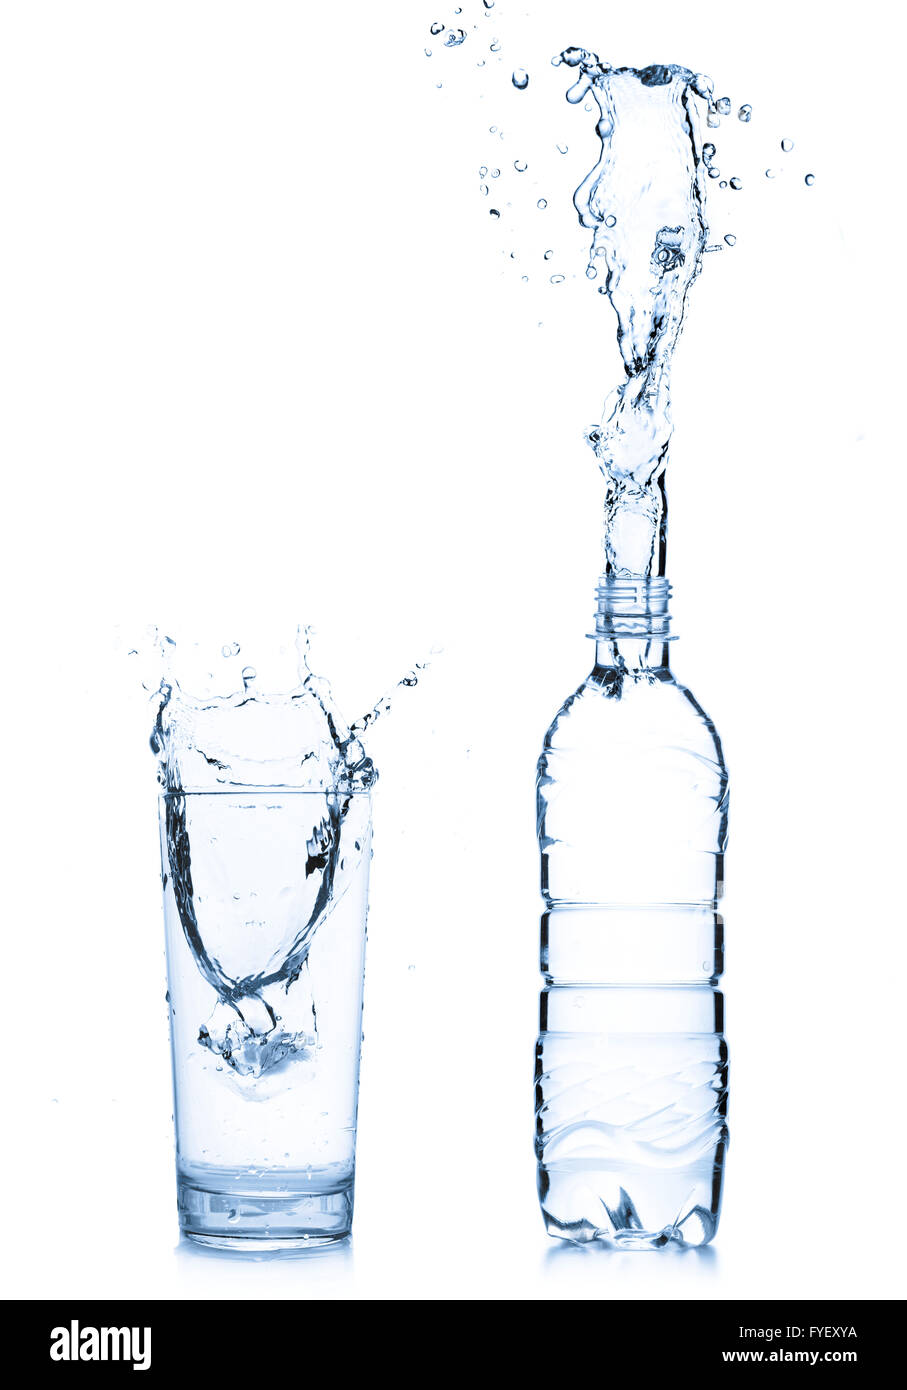 water glass and bottle Stock Photo